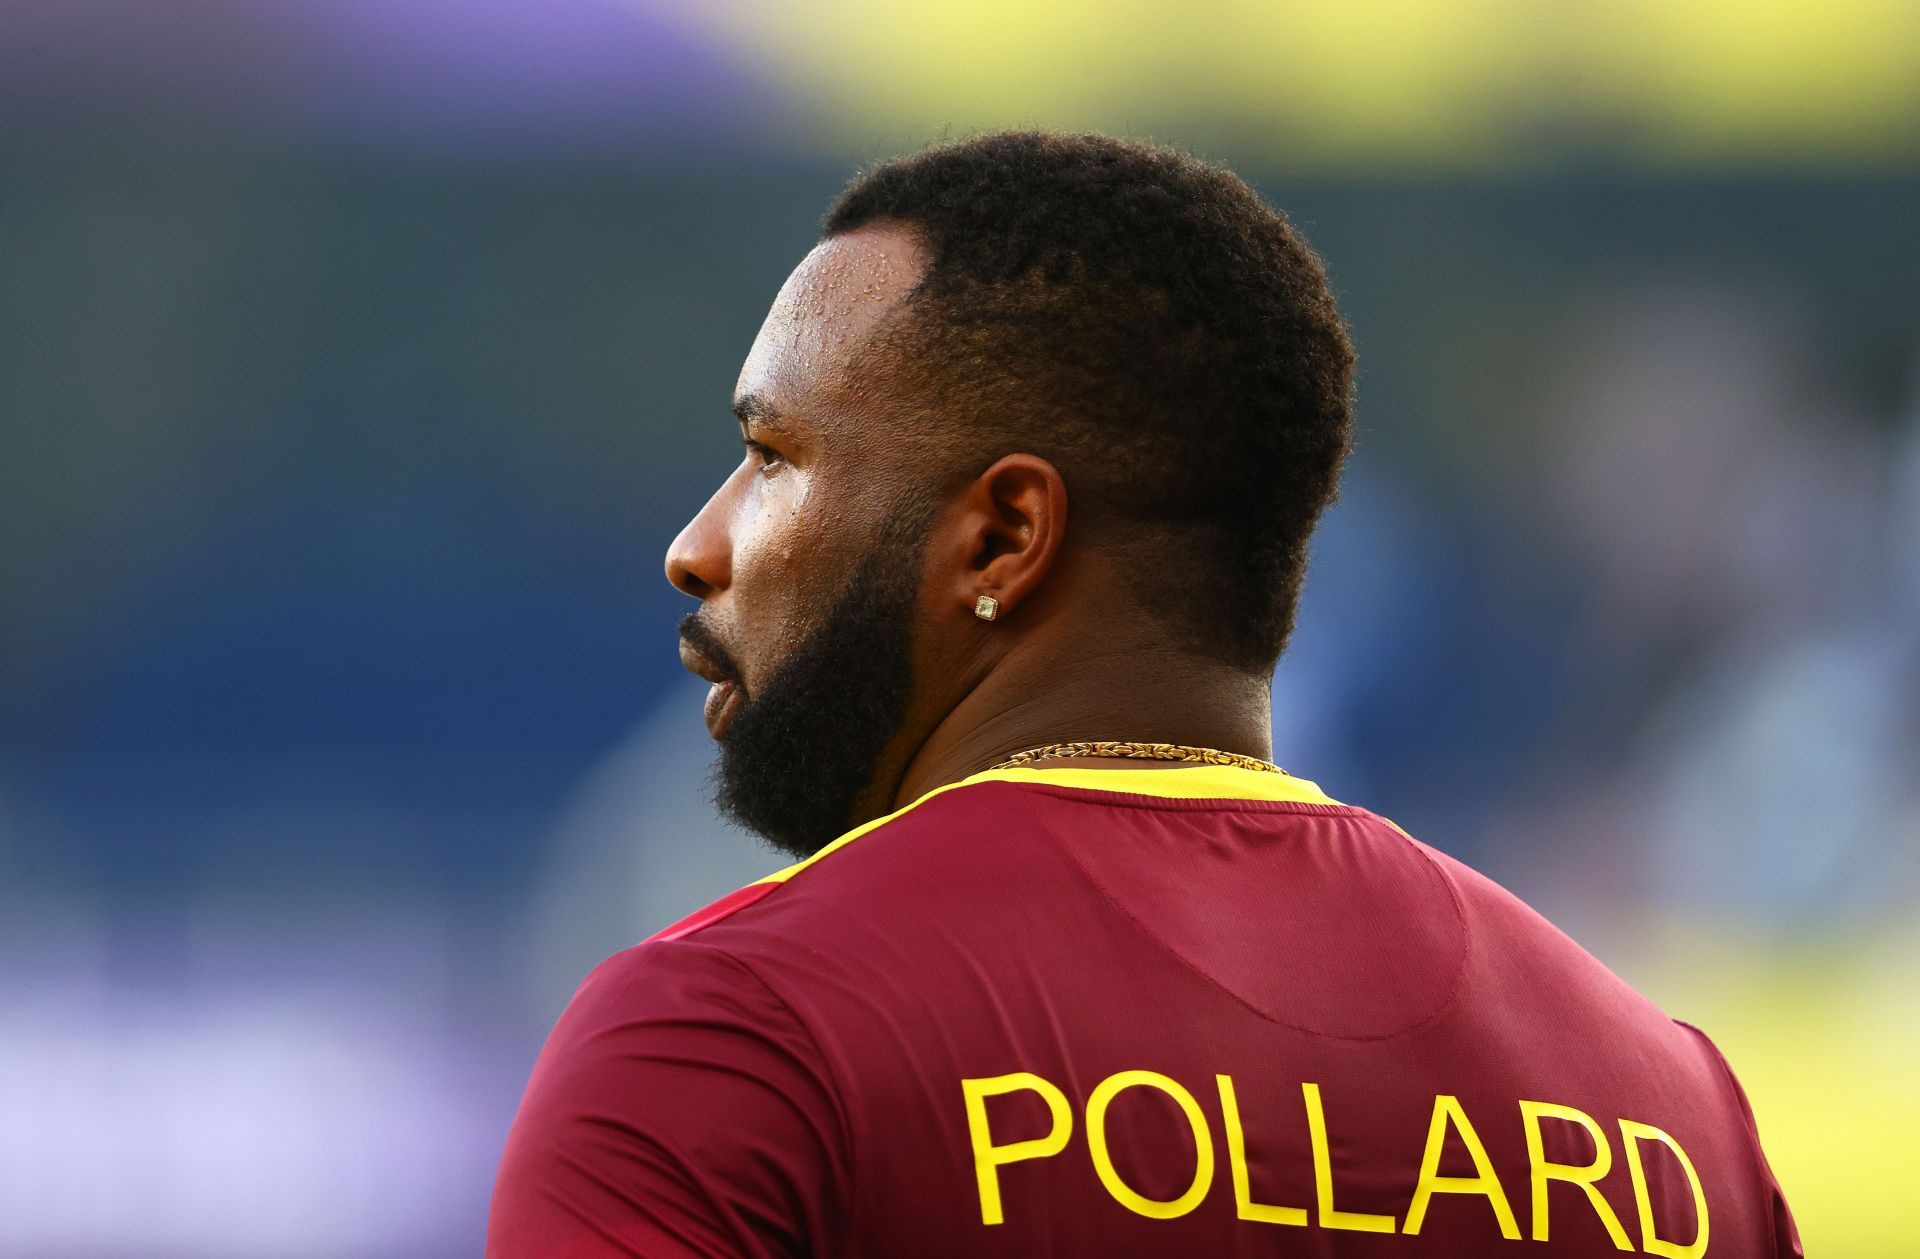 Kieron Pollard will continue to lead the side in the upcoming white-ball tour of Pakistan.